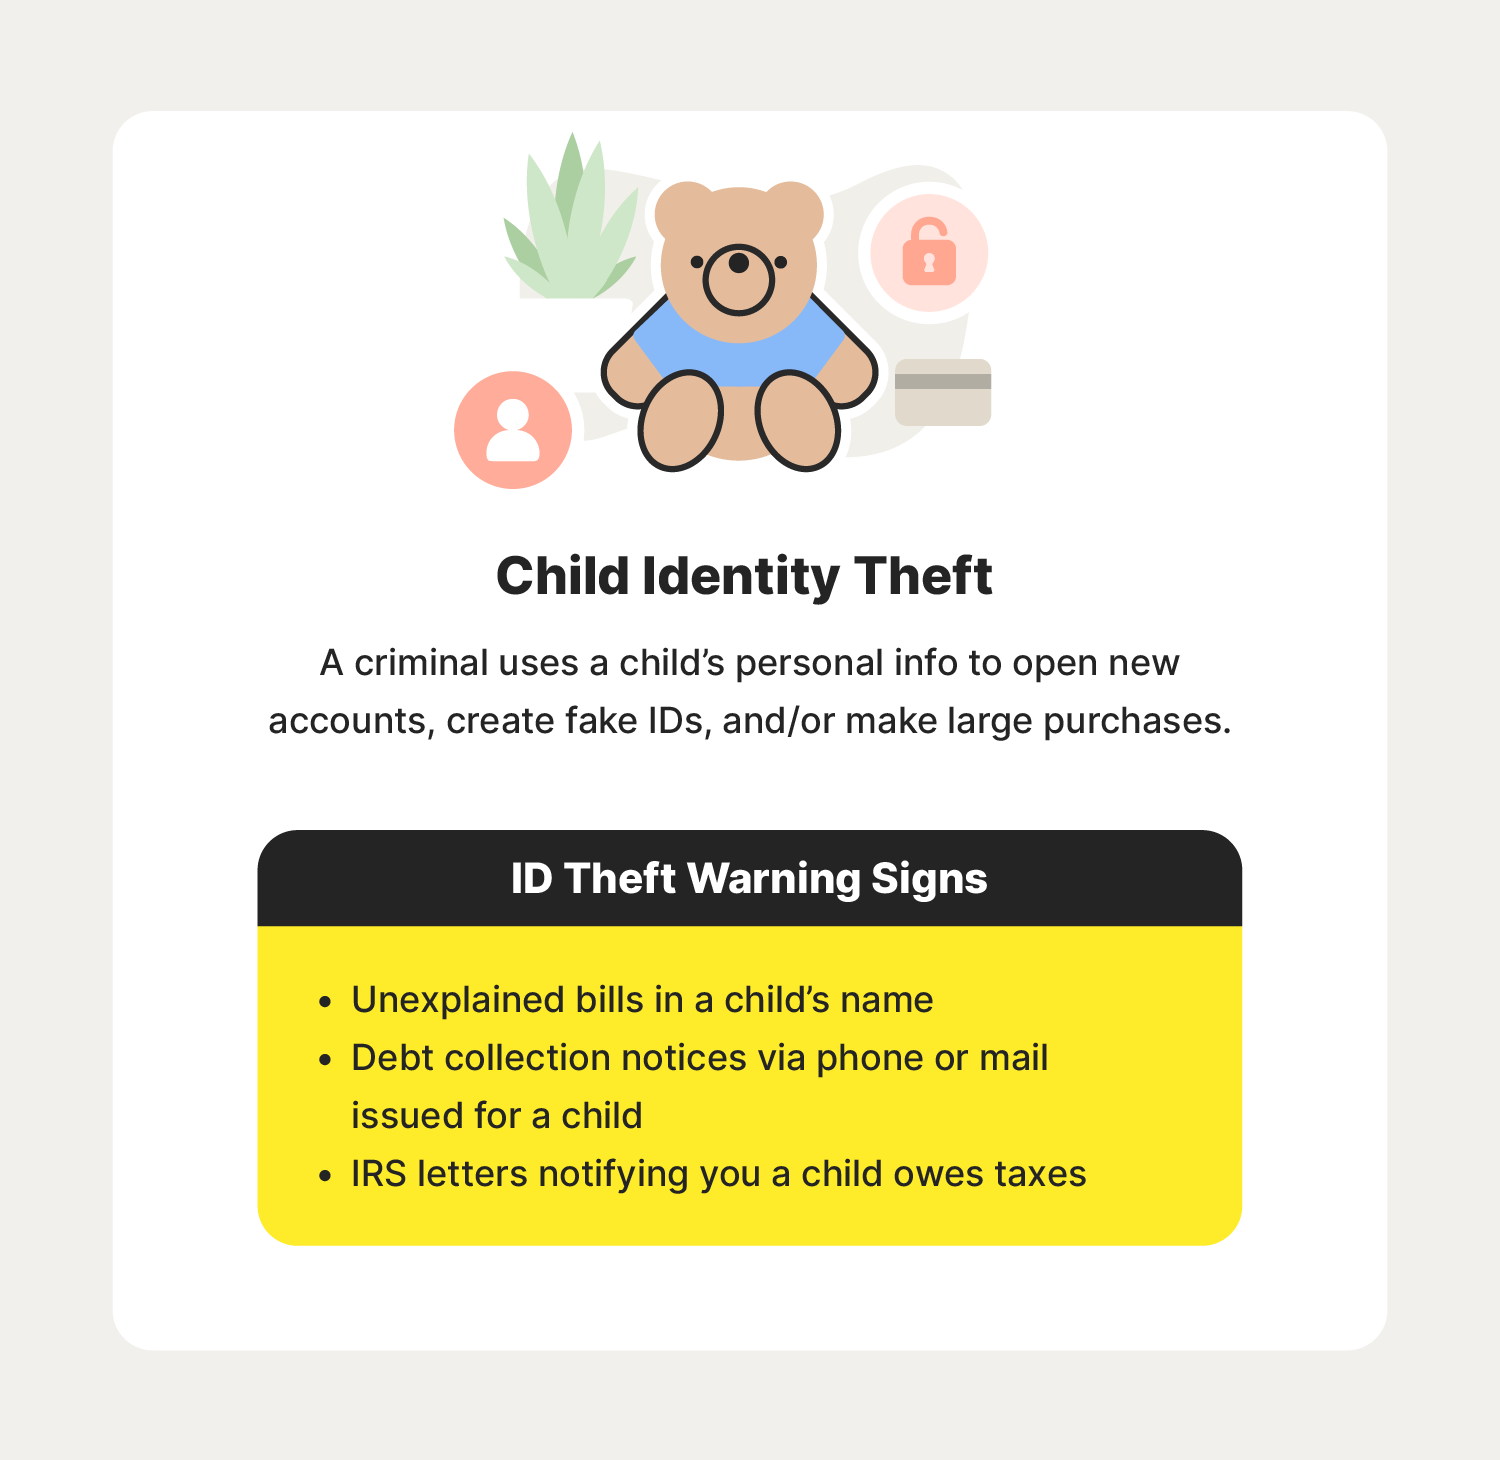 A graphic describes child identity theft, a type of identity theft to keep an eye on when learning how to avoid identity theft.